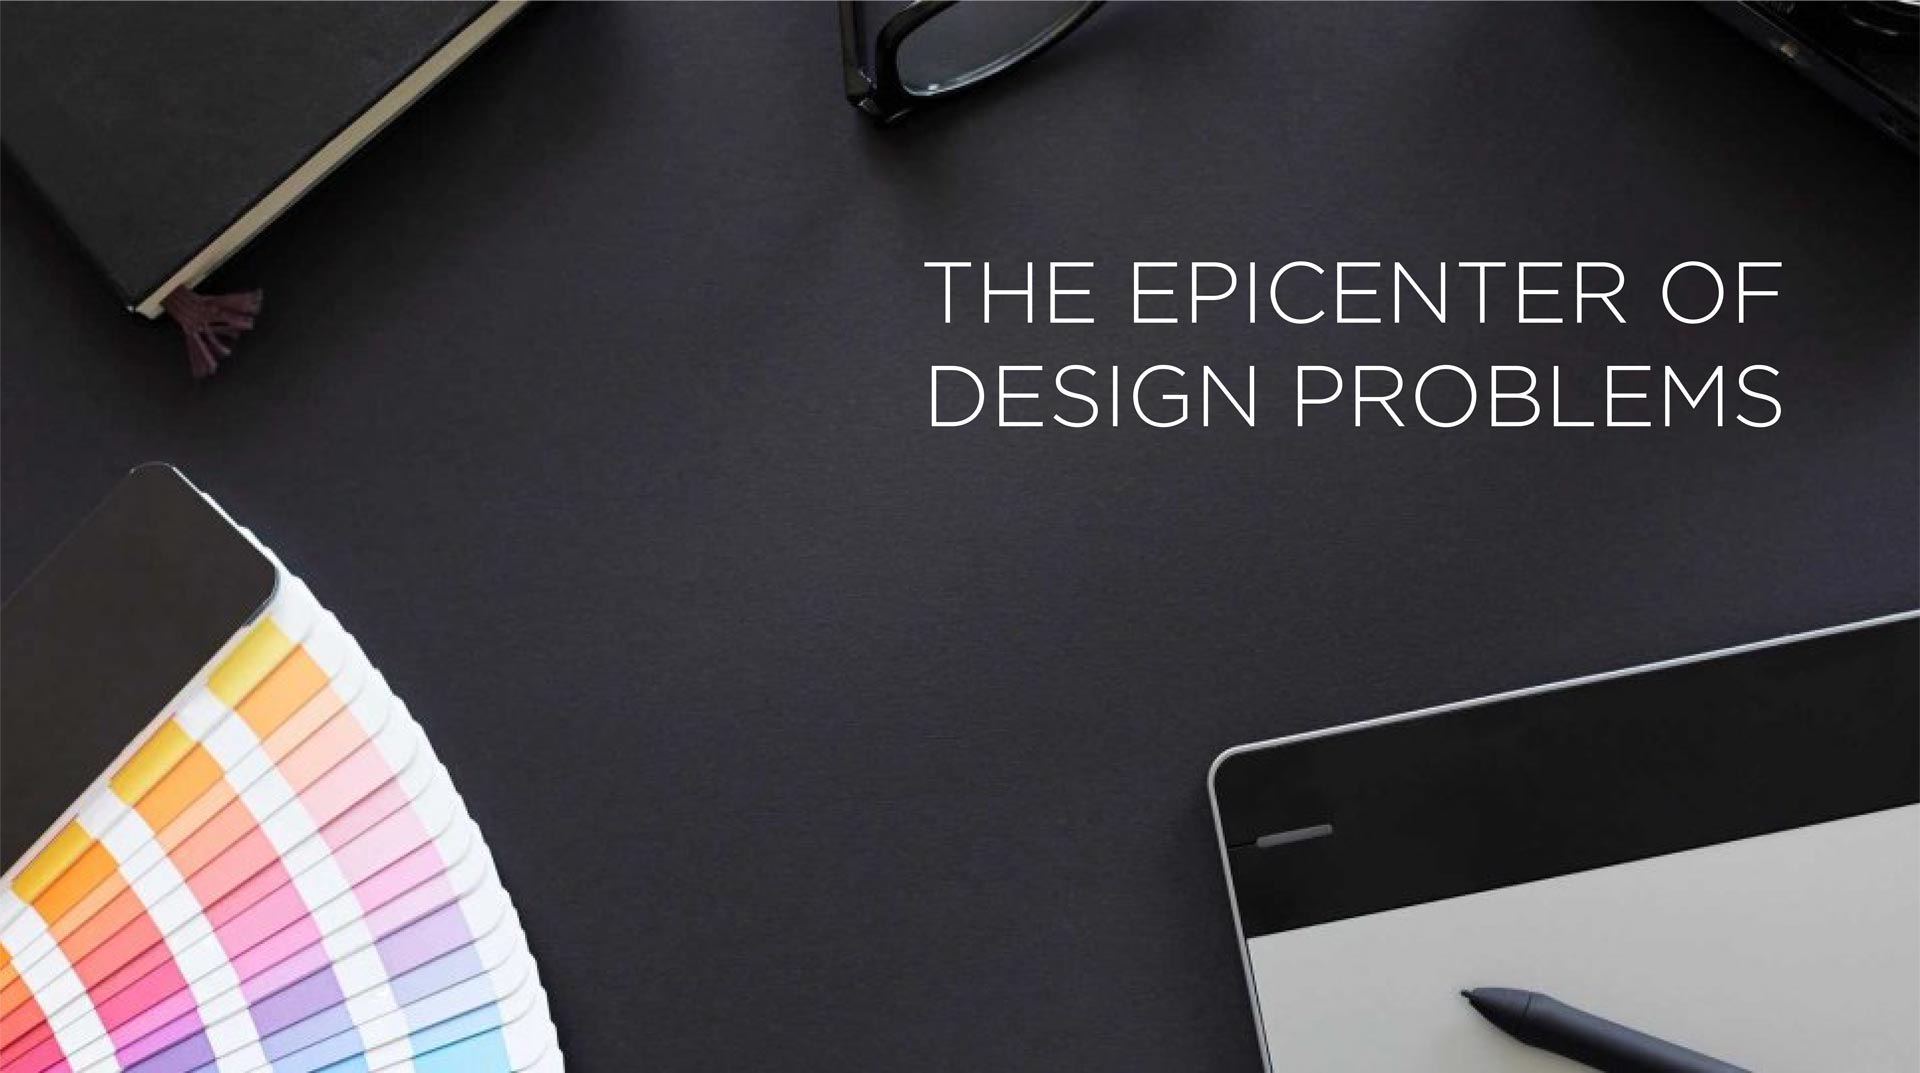 THE EPICENTER OF DESIGN PROBLEMS